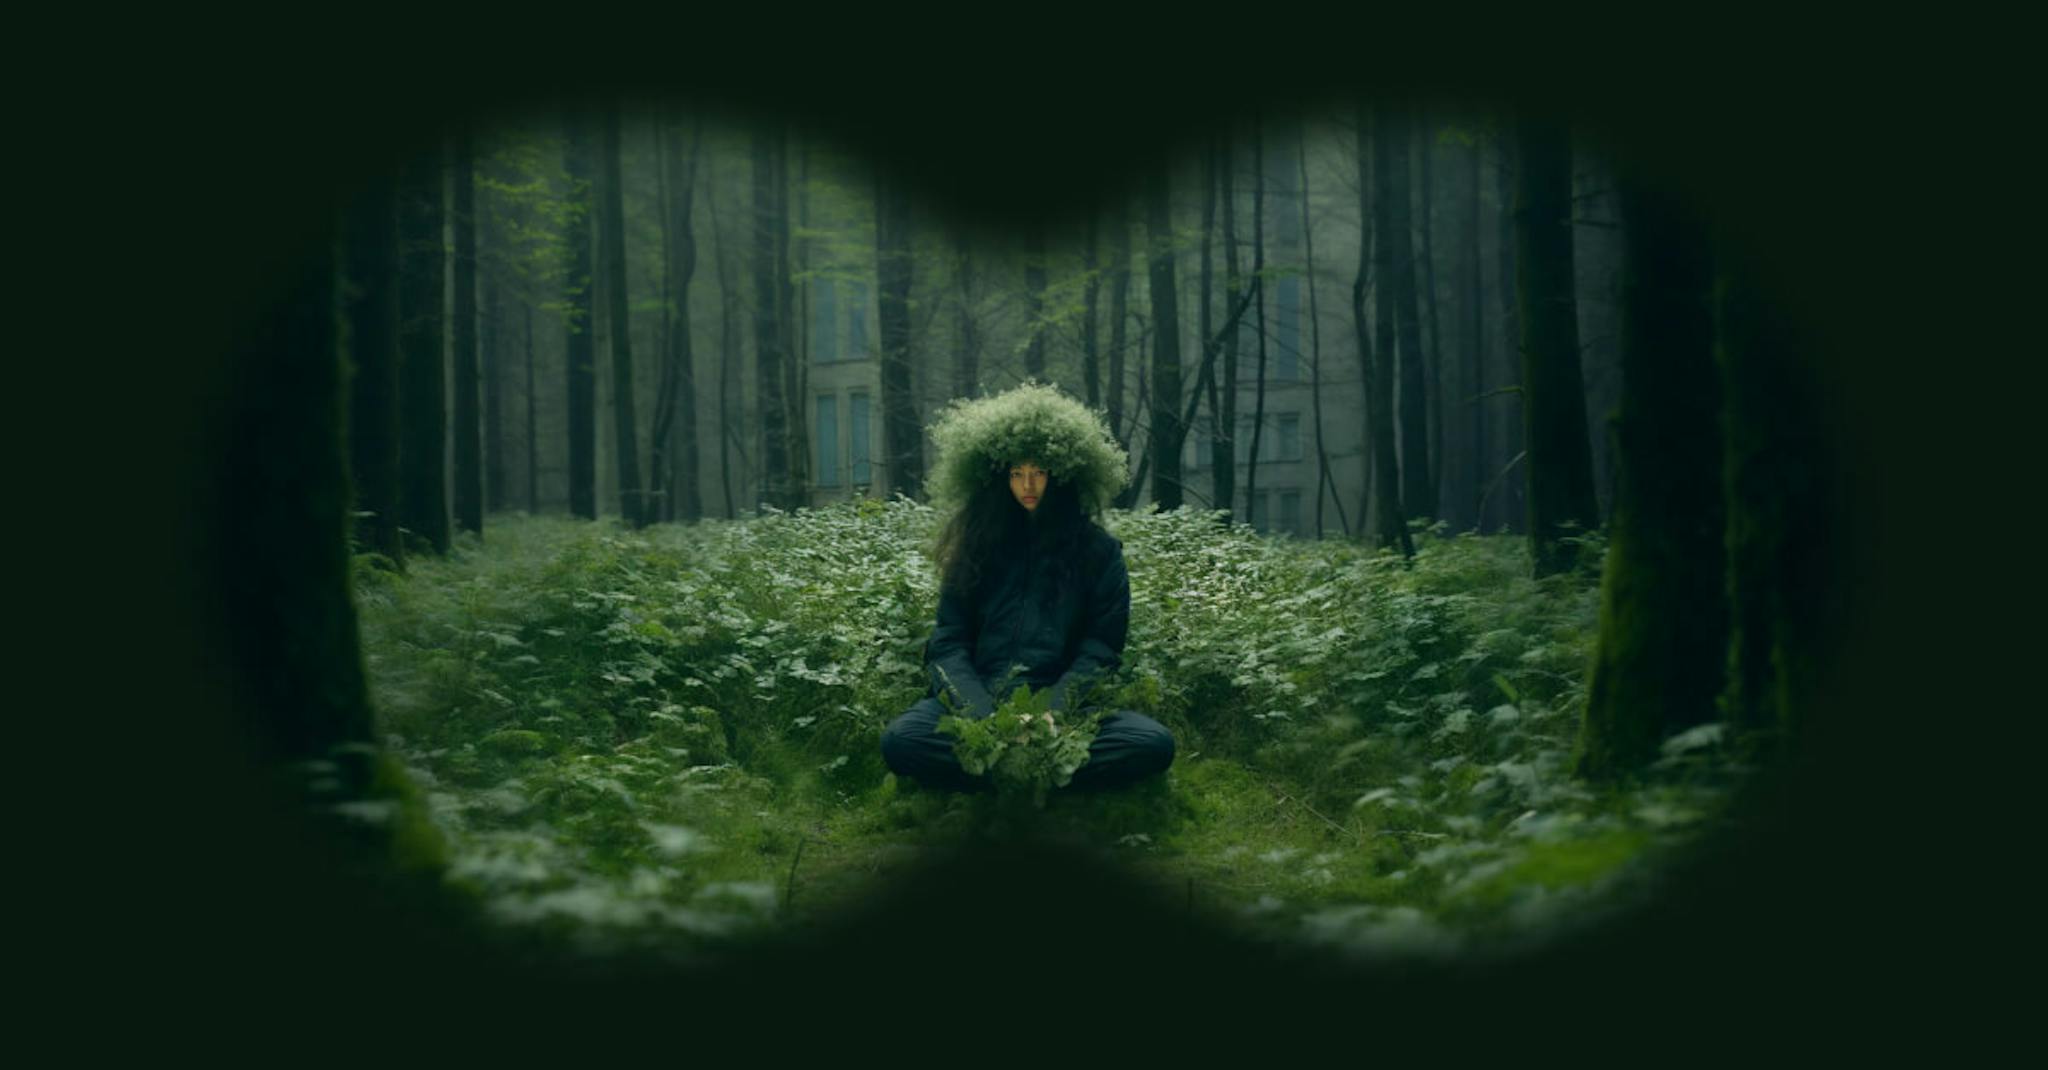 Person with a leafy headdress sitting in a forest, viewed through a binocular vignette.
